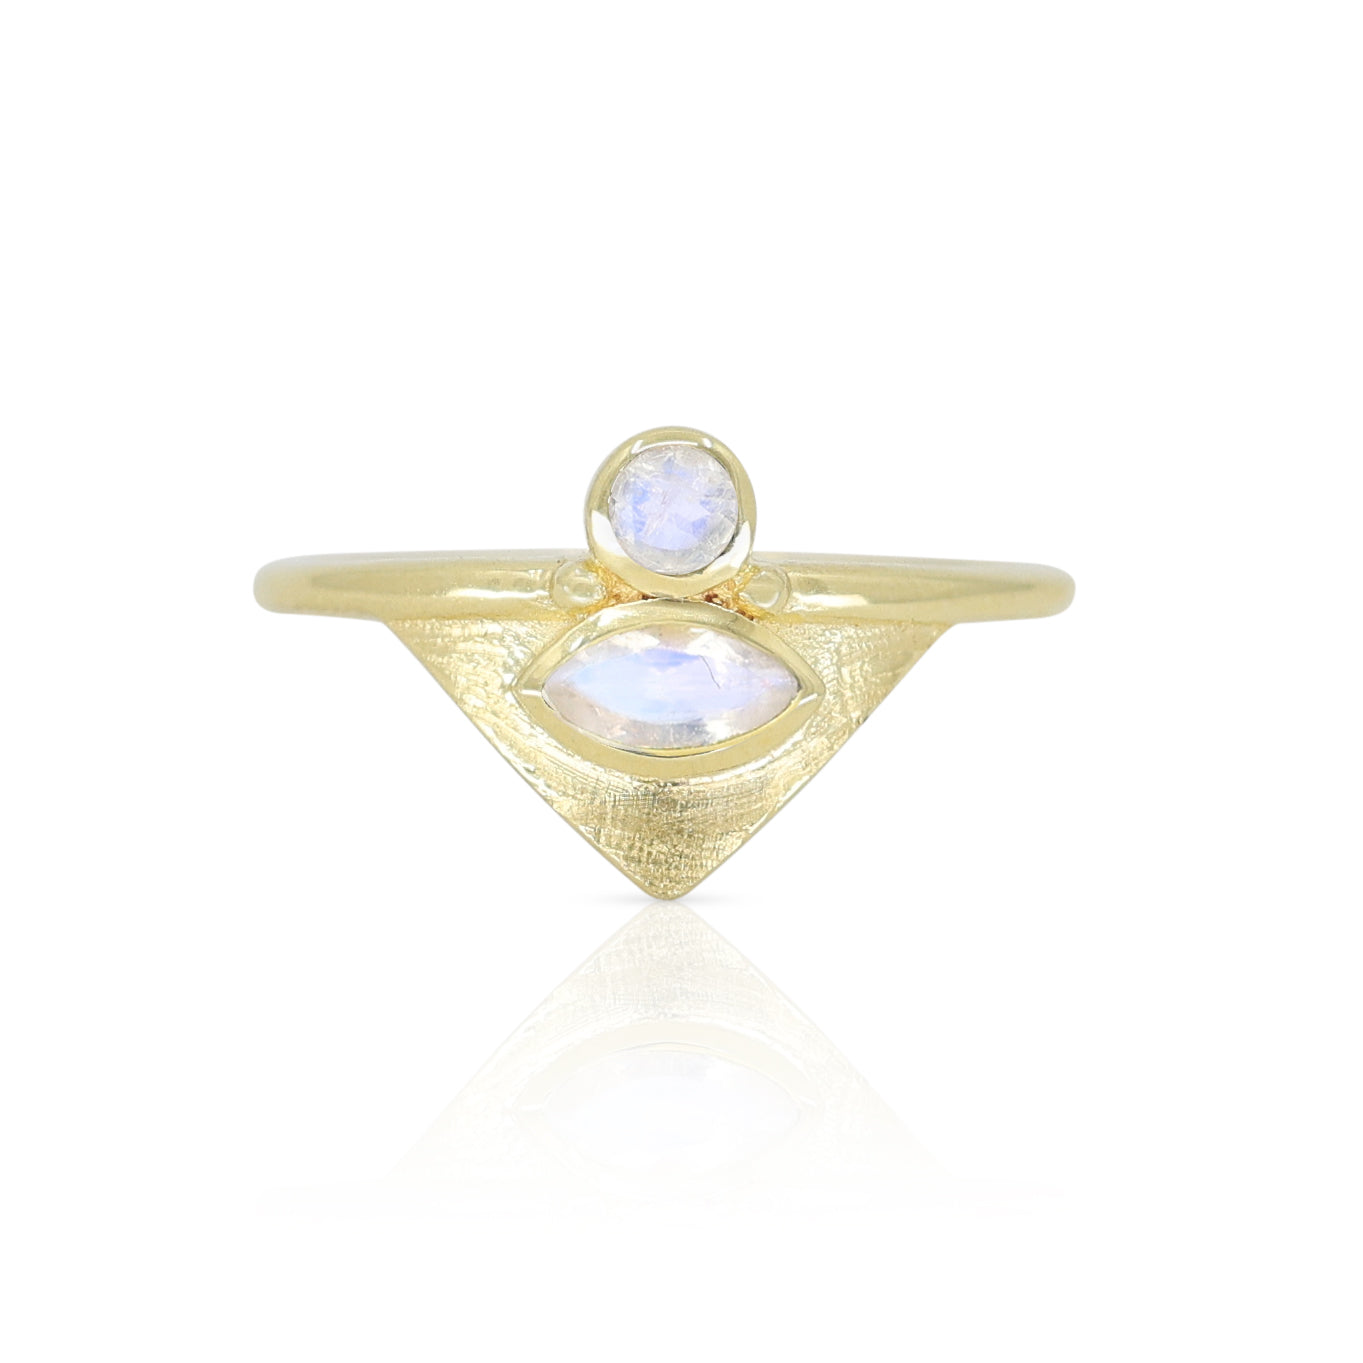 The Nile Moonstone Gold Ring